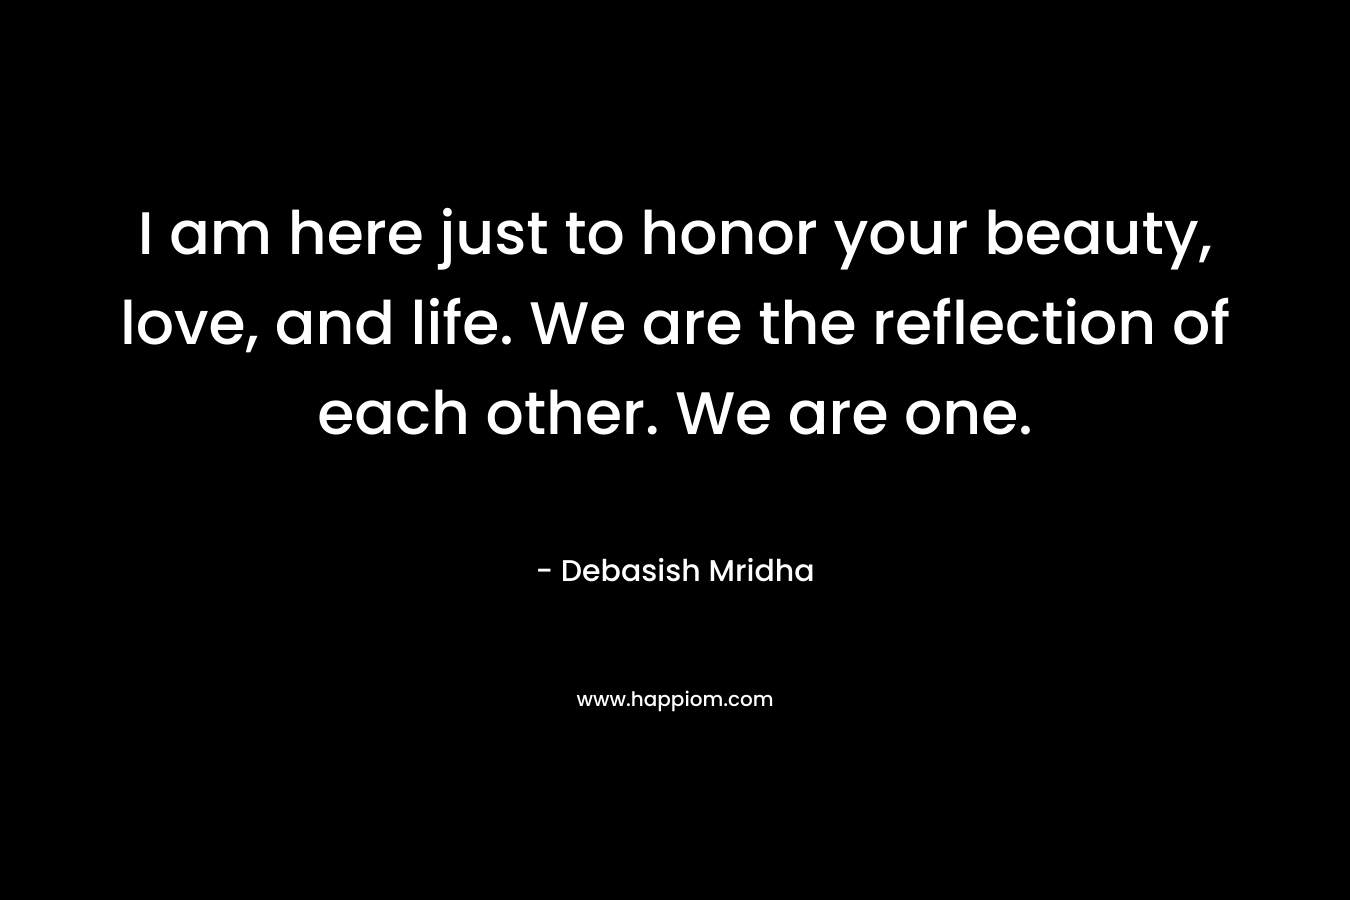 I am here just to honor your beauty, love, and life. We are the reflection of each other. We are one.